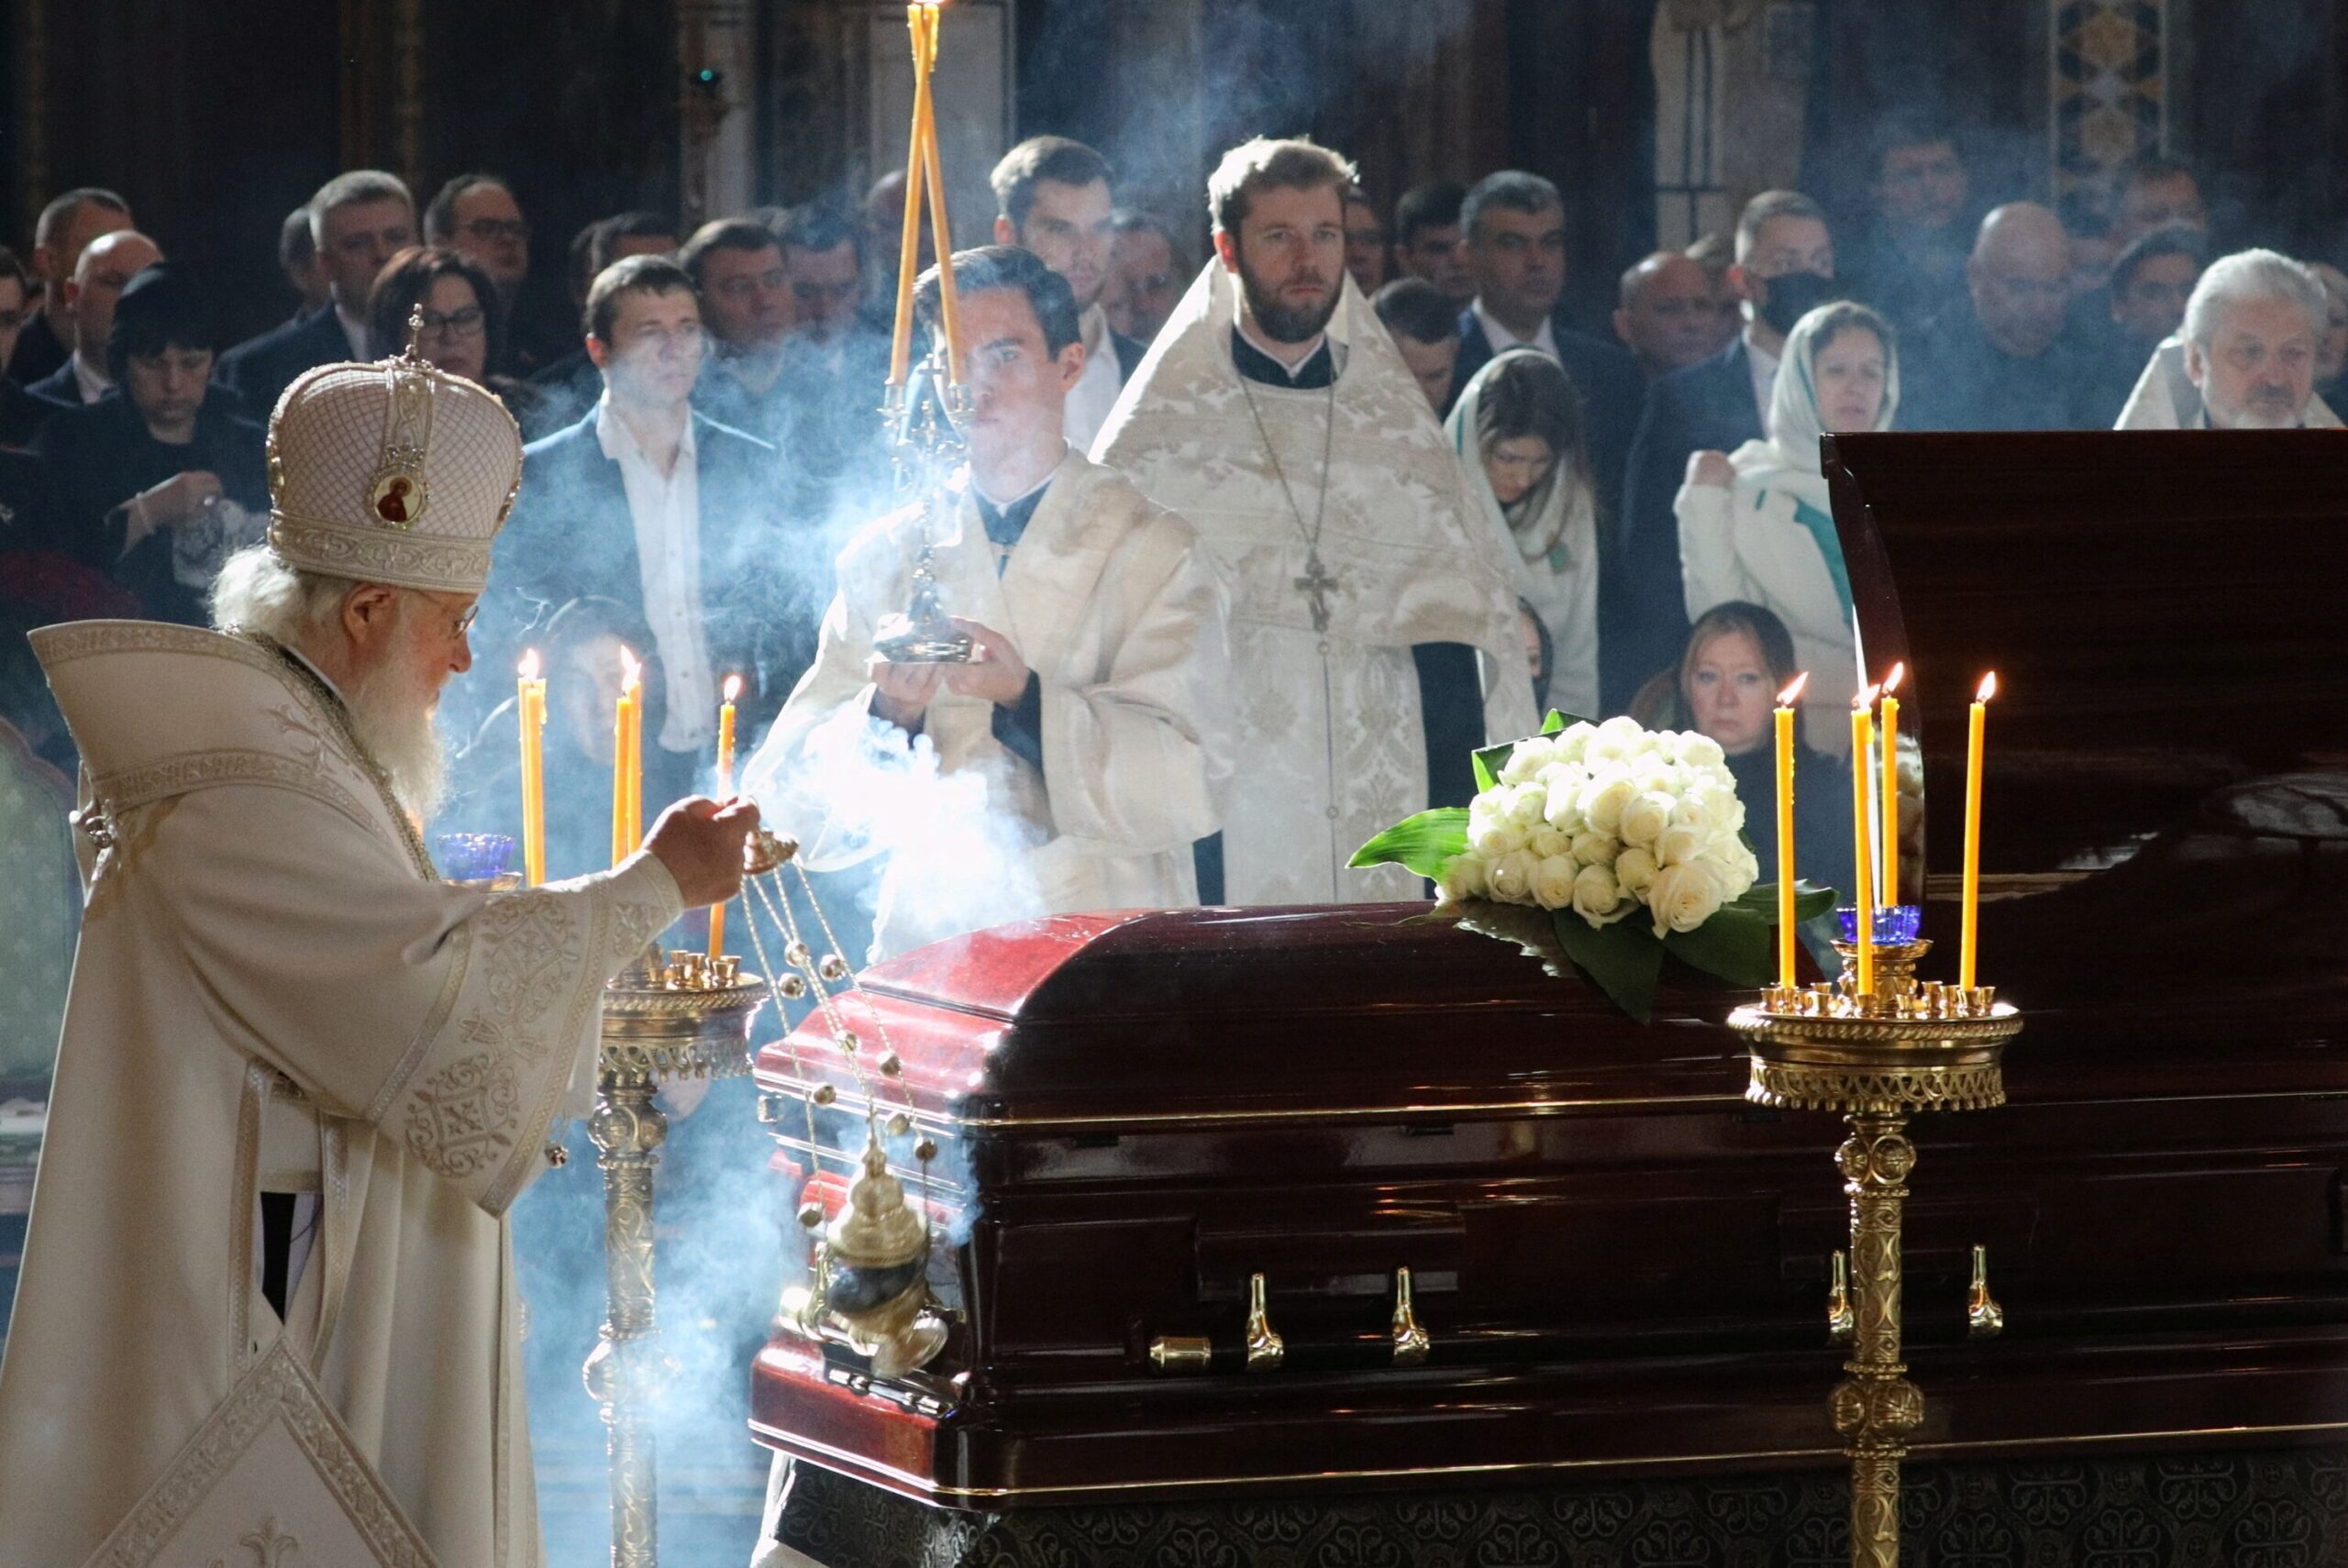 Russian Patriarch prays for quick end to Ukraine conflict but avoids criticizing it